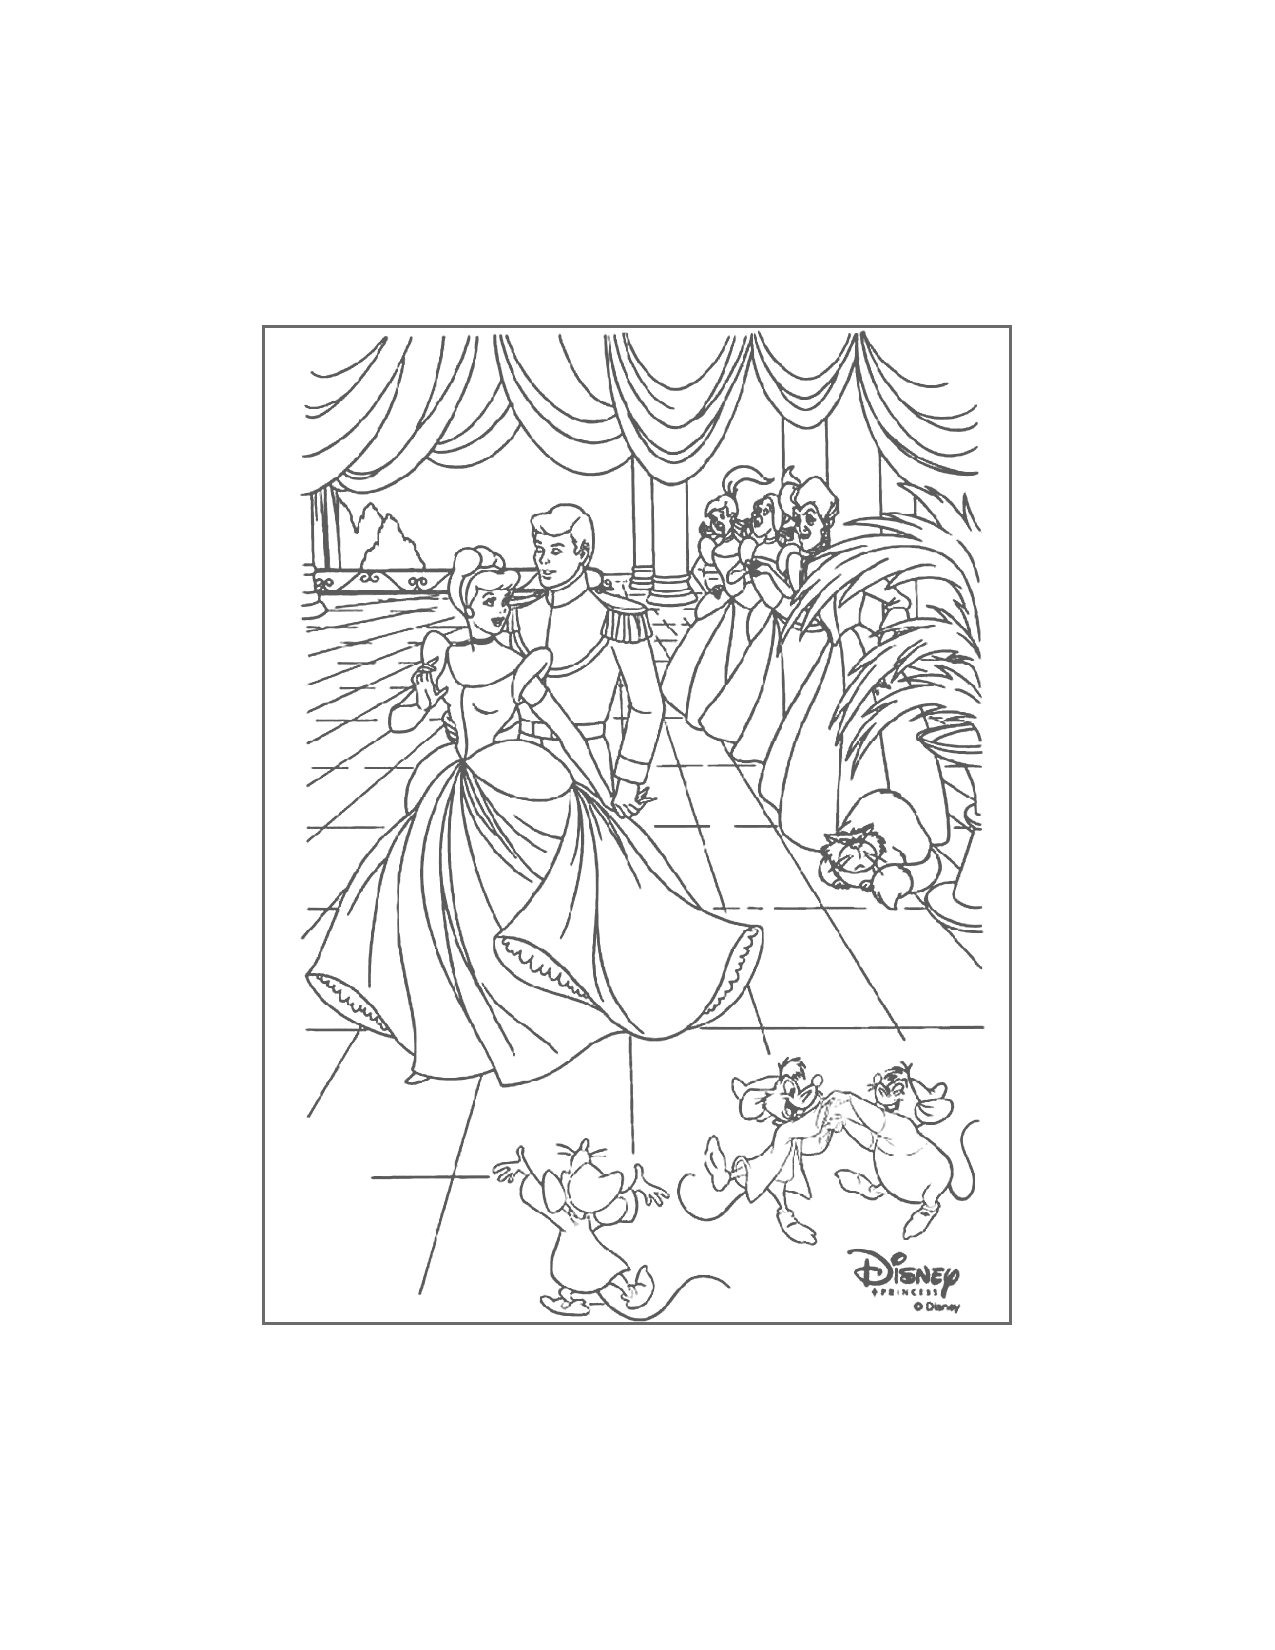 Cinderella Dances With The Prince Coloring Page